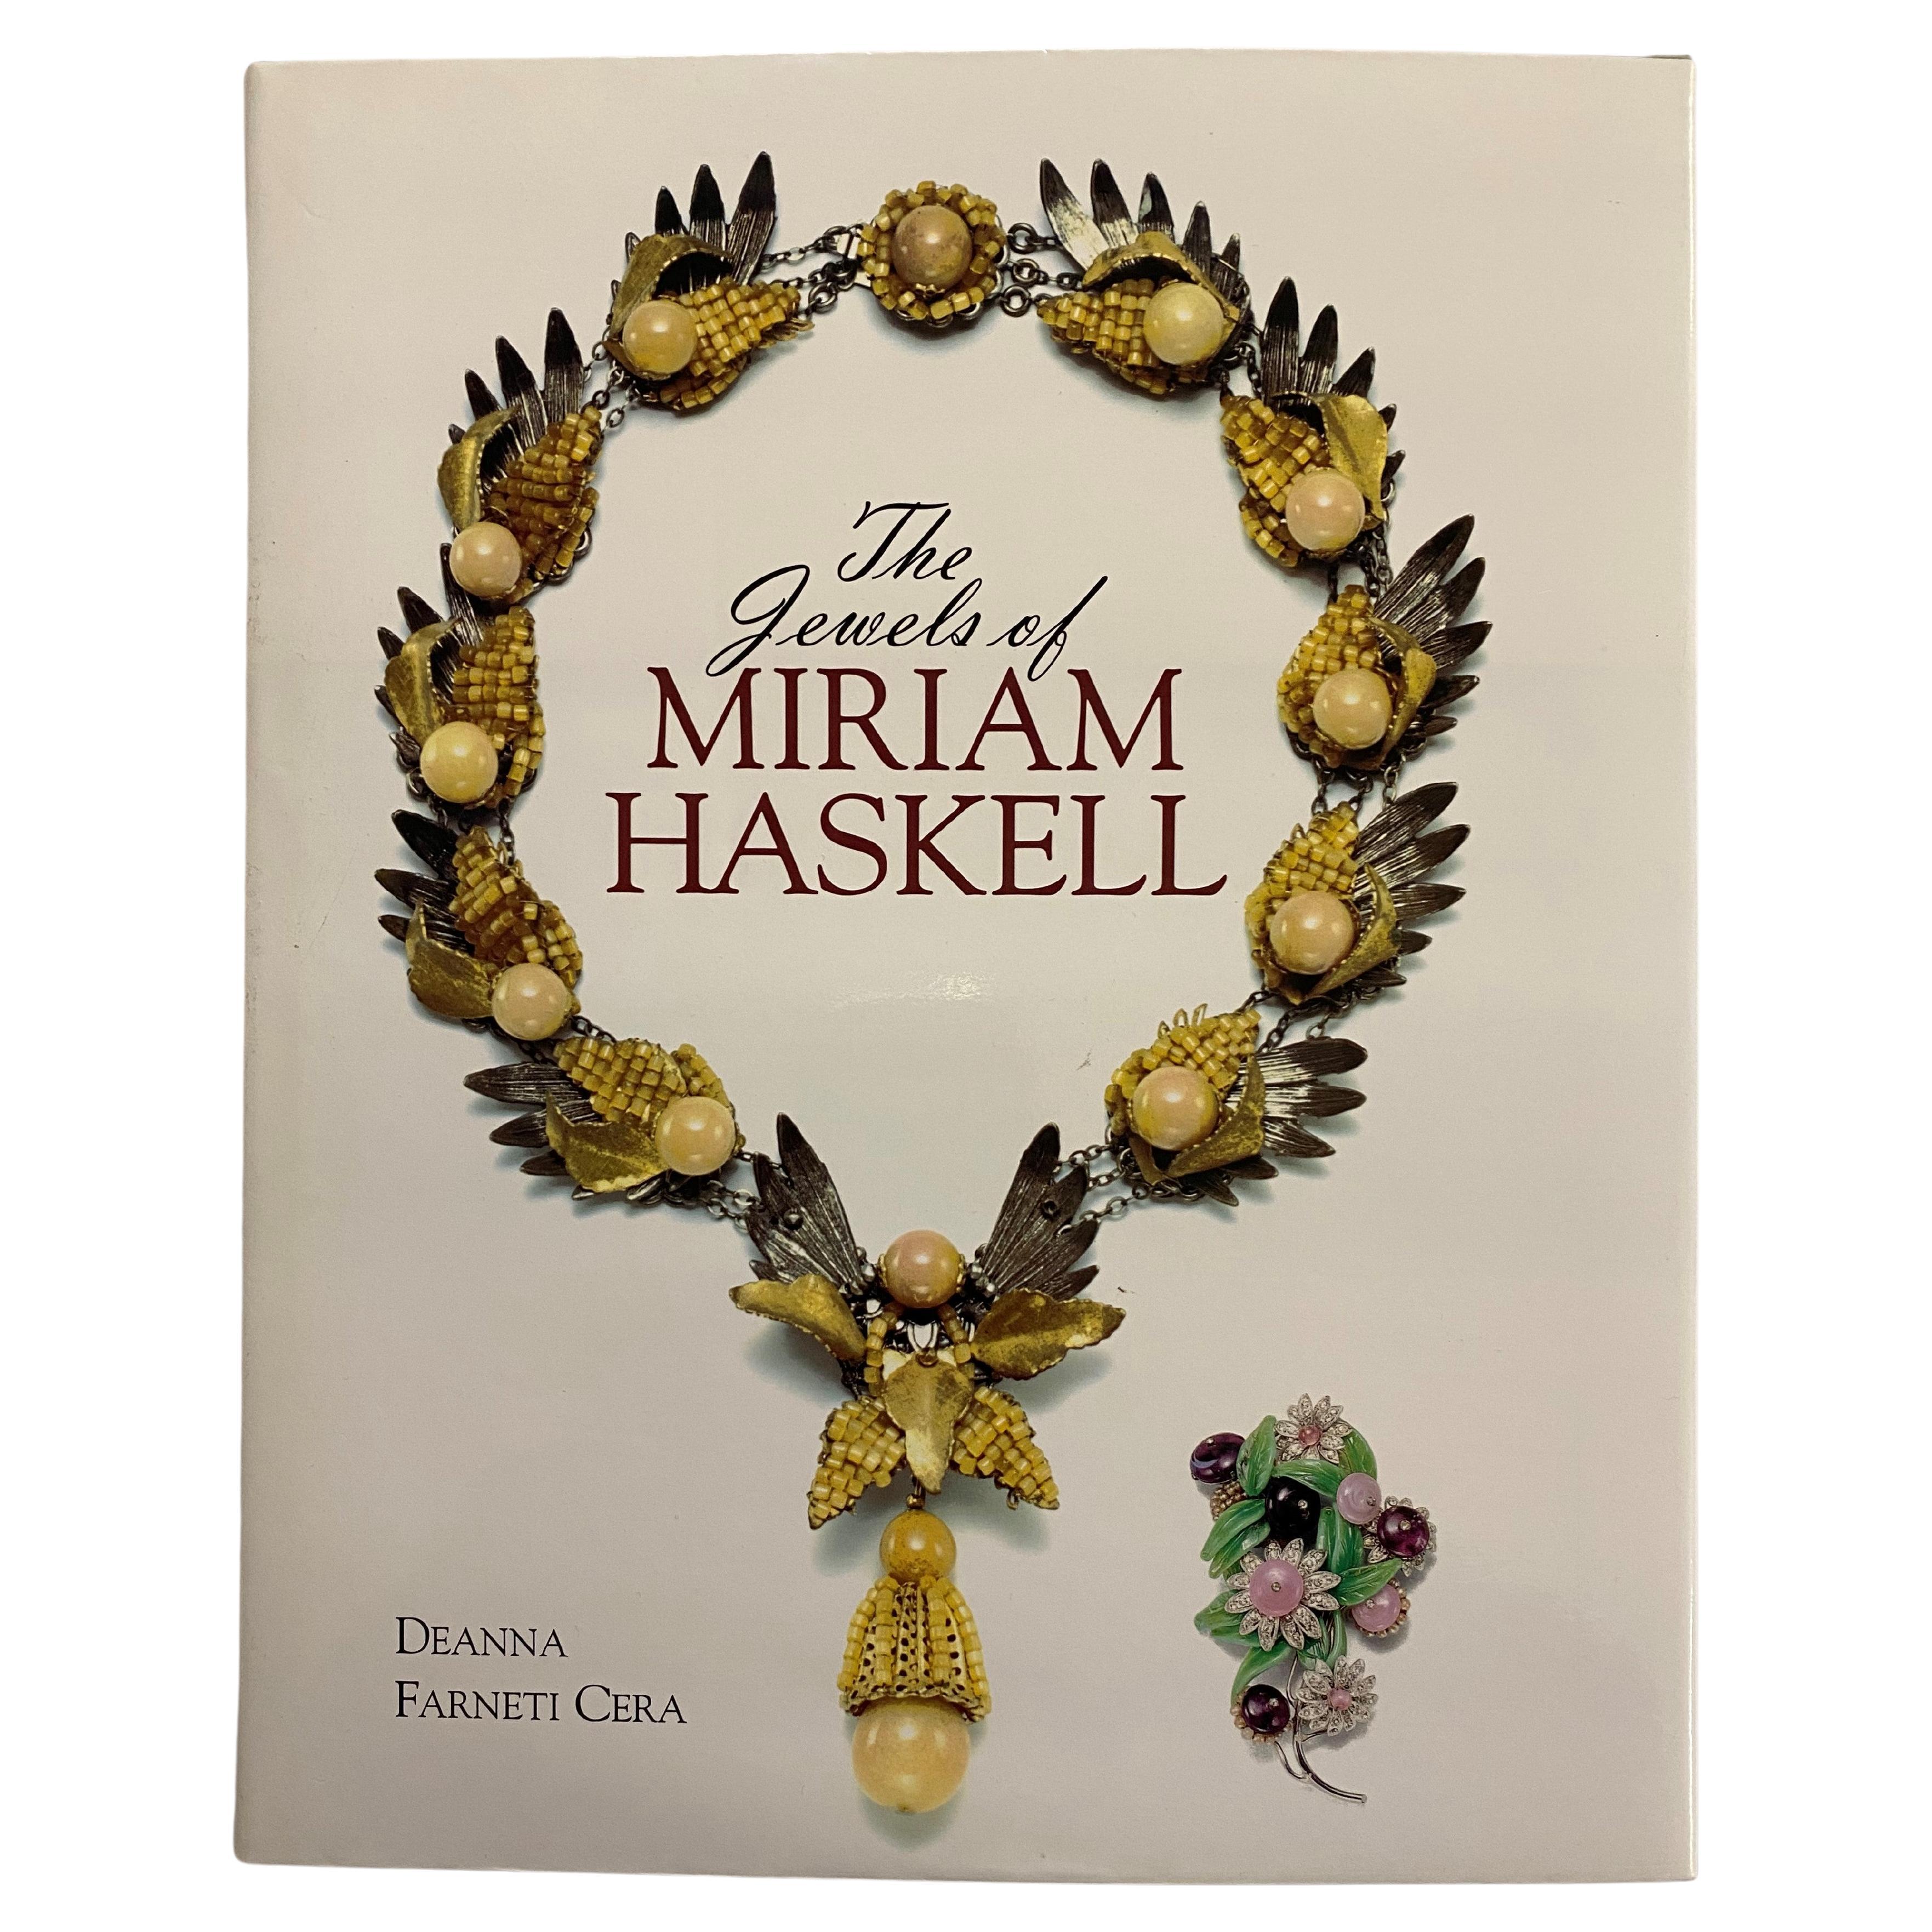 The Jewels of Miriam Haskell by Deanna Farneti Cera (Book)